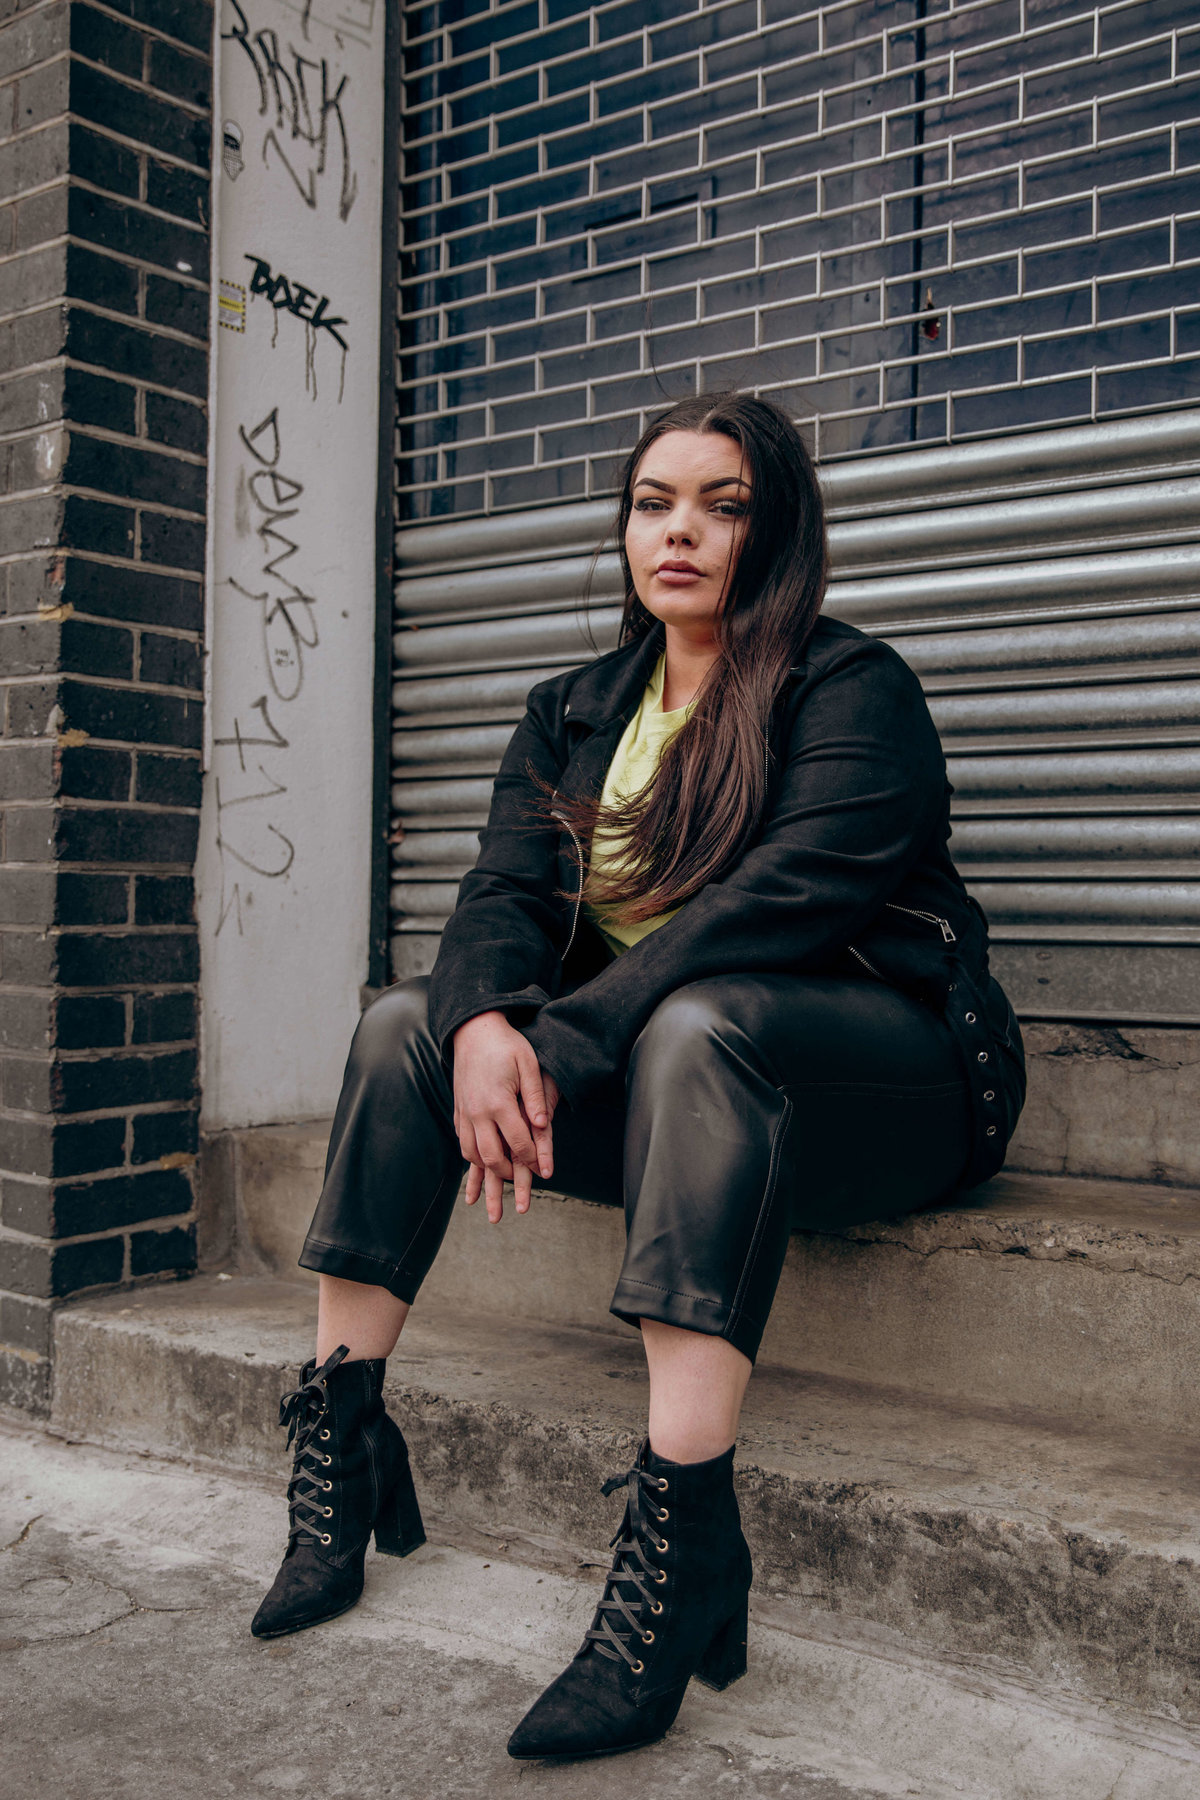 Tia wearing leather and a neon t shirt, sat on concrete steps infront of a metal shutter.